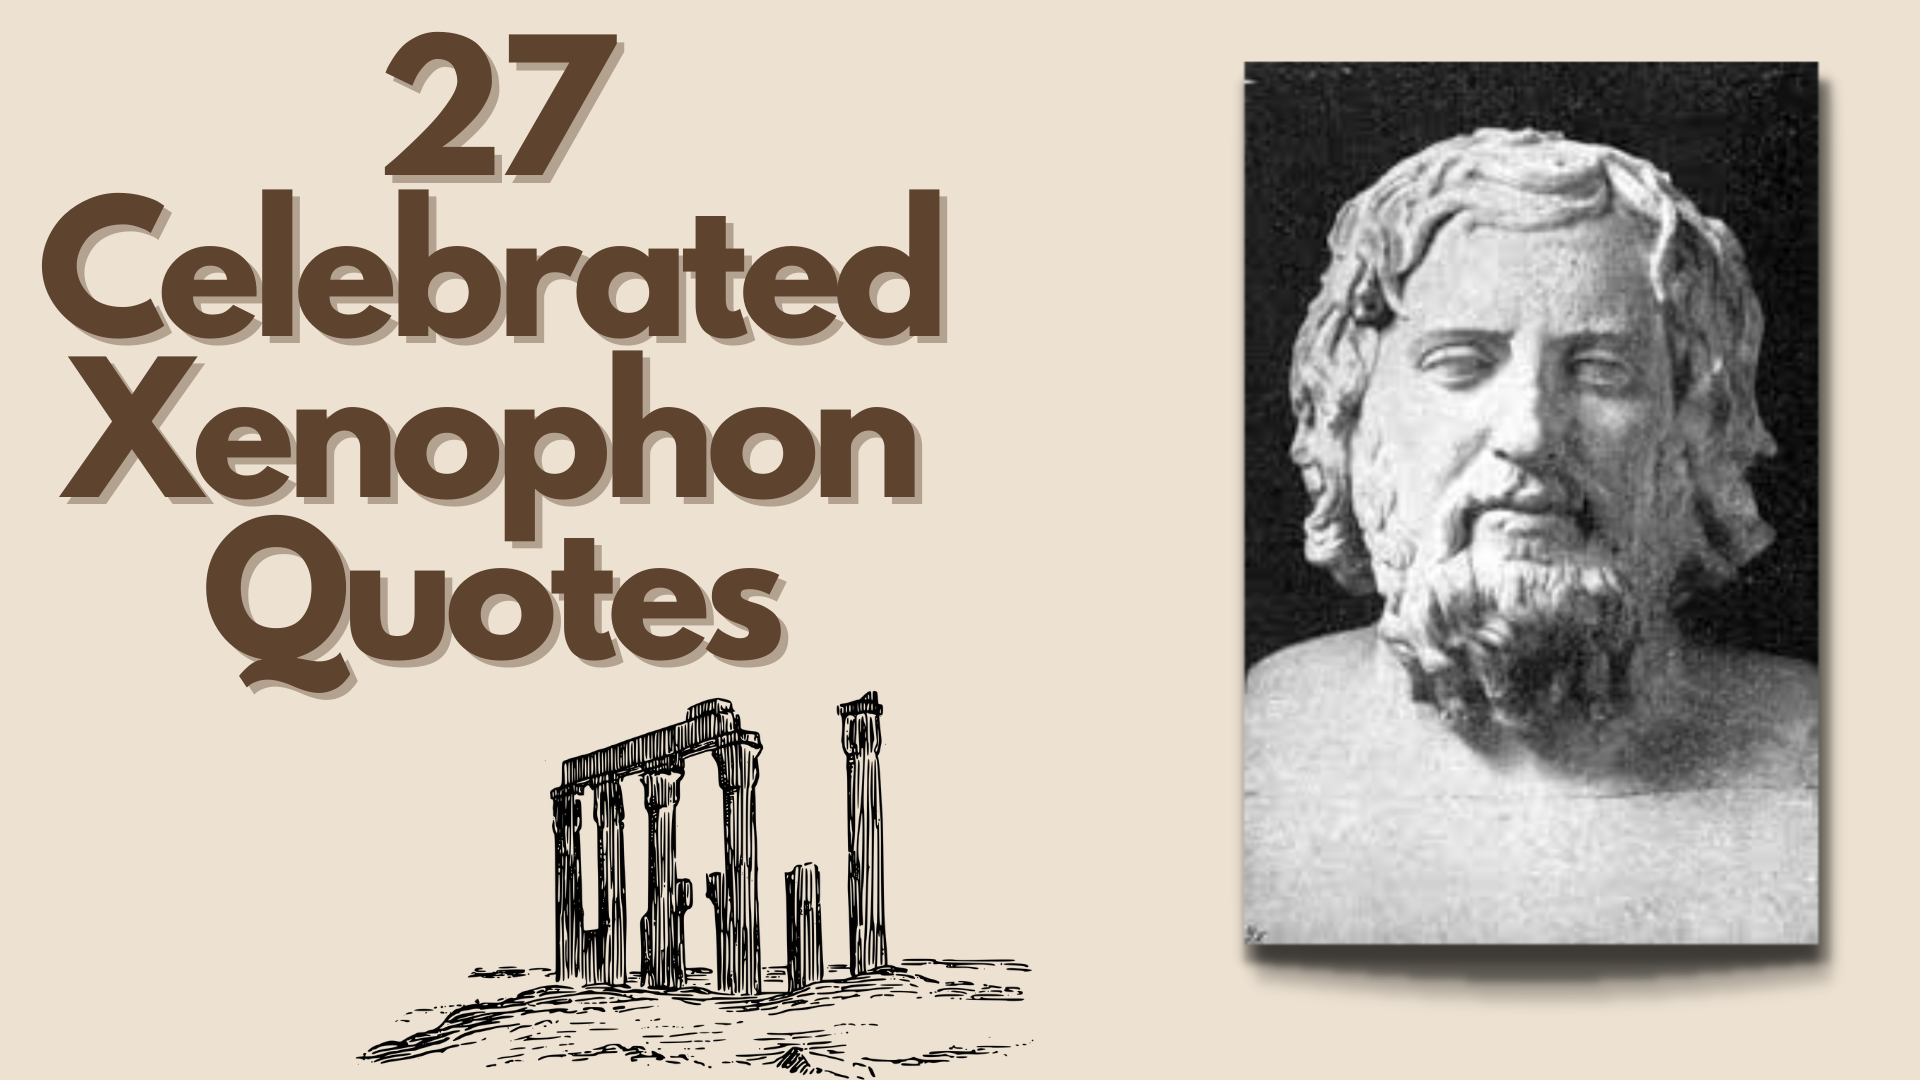 xenophon quotes